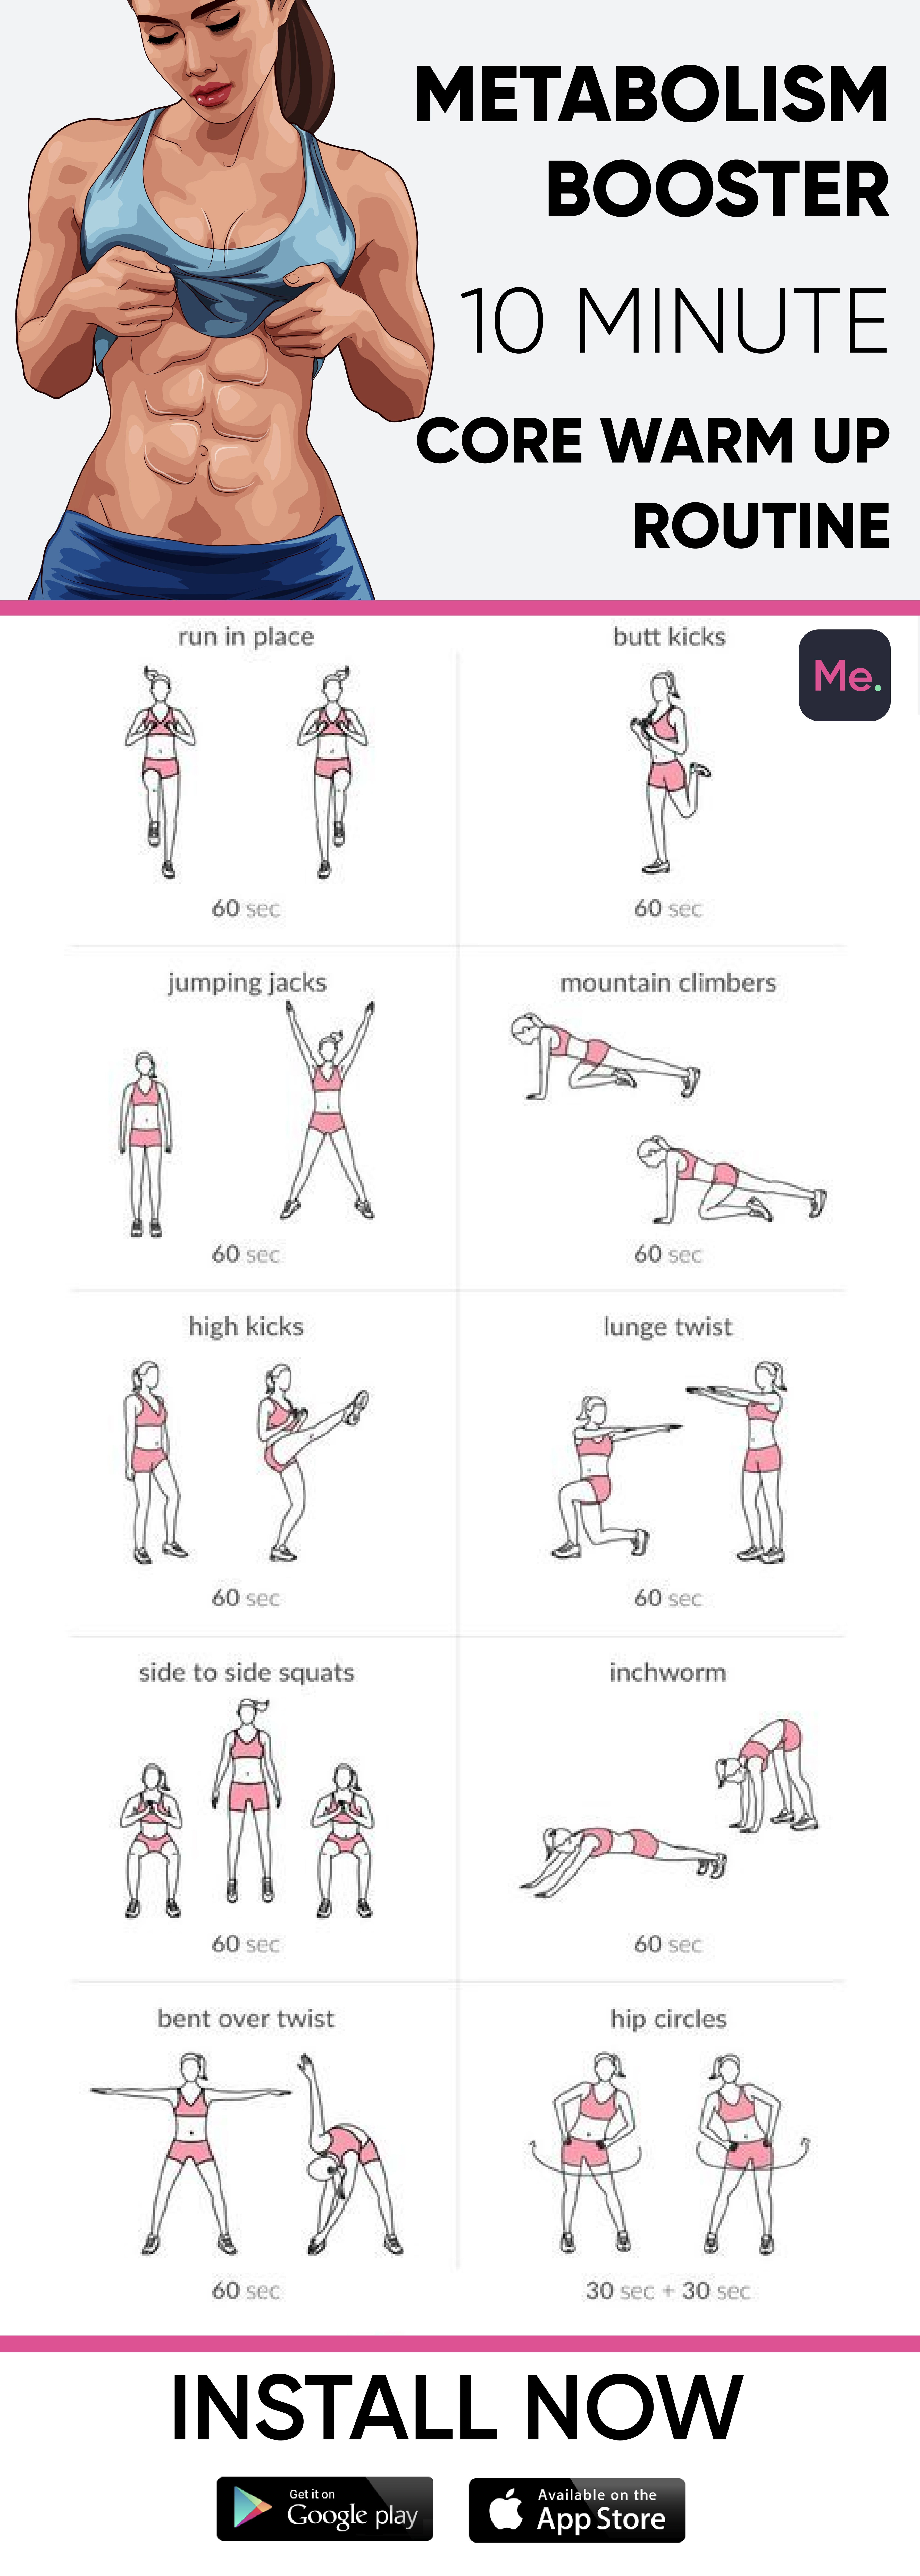 Metabolic Booster Workout -   10 fitness Routine gym ideas